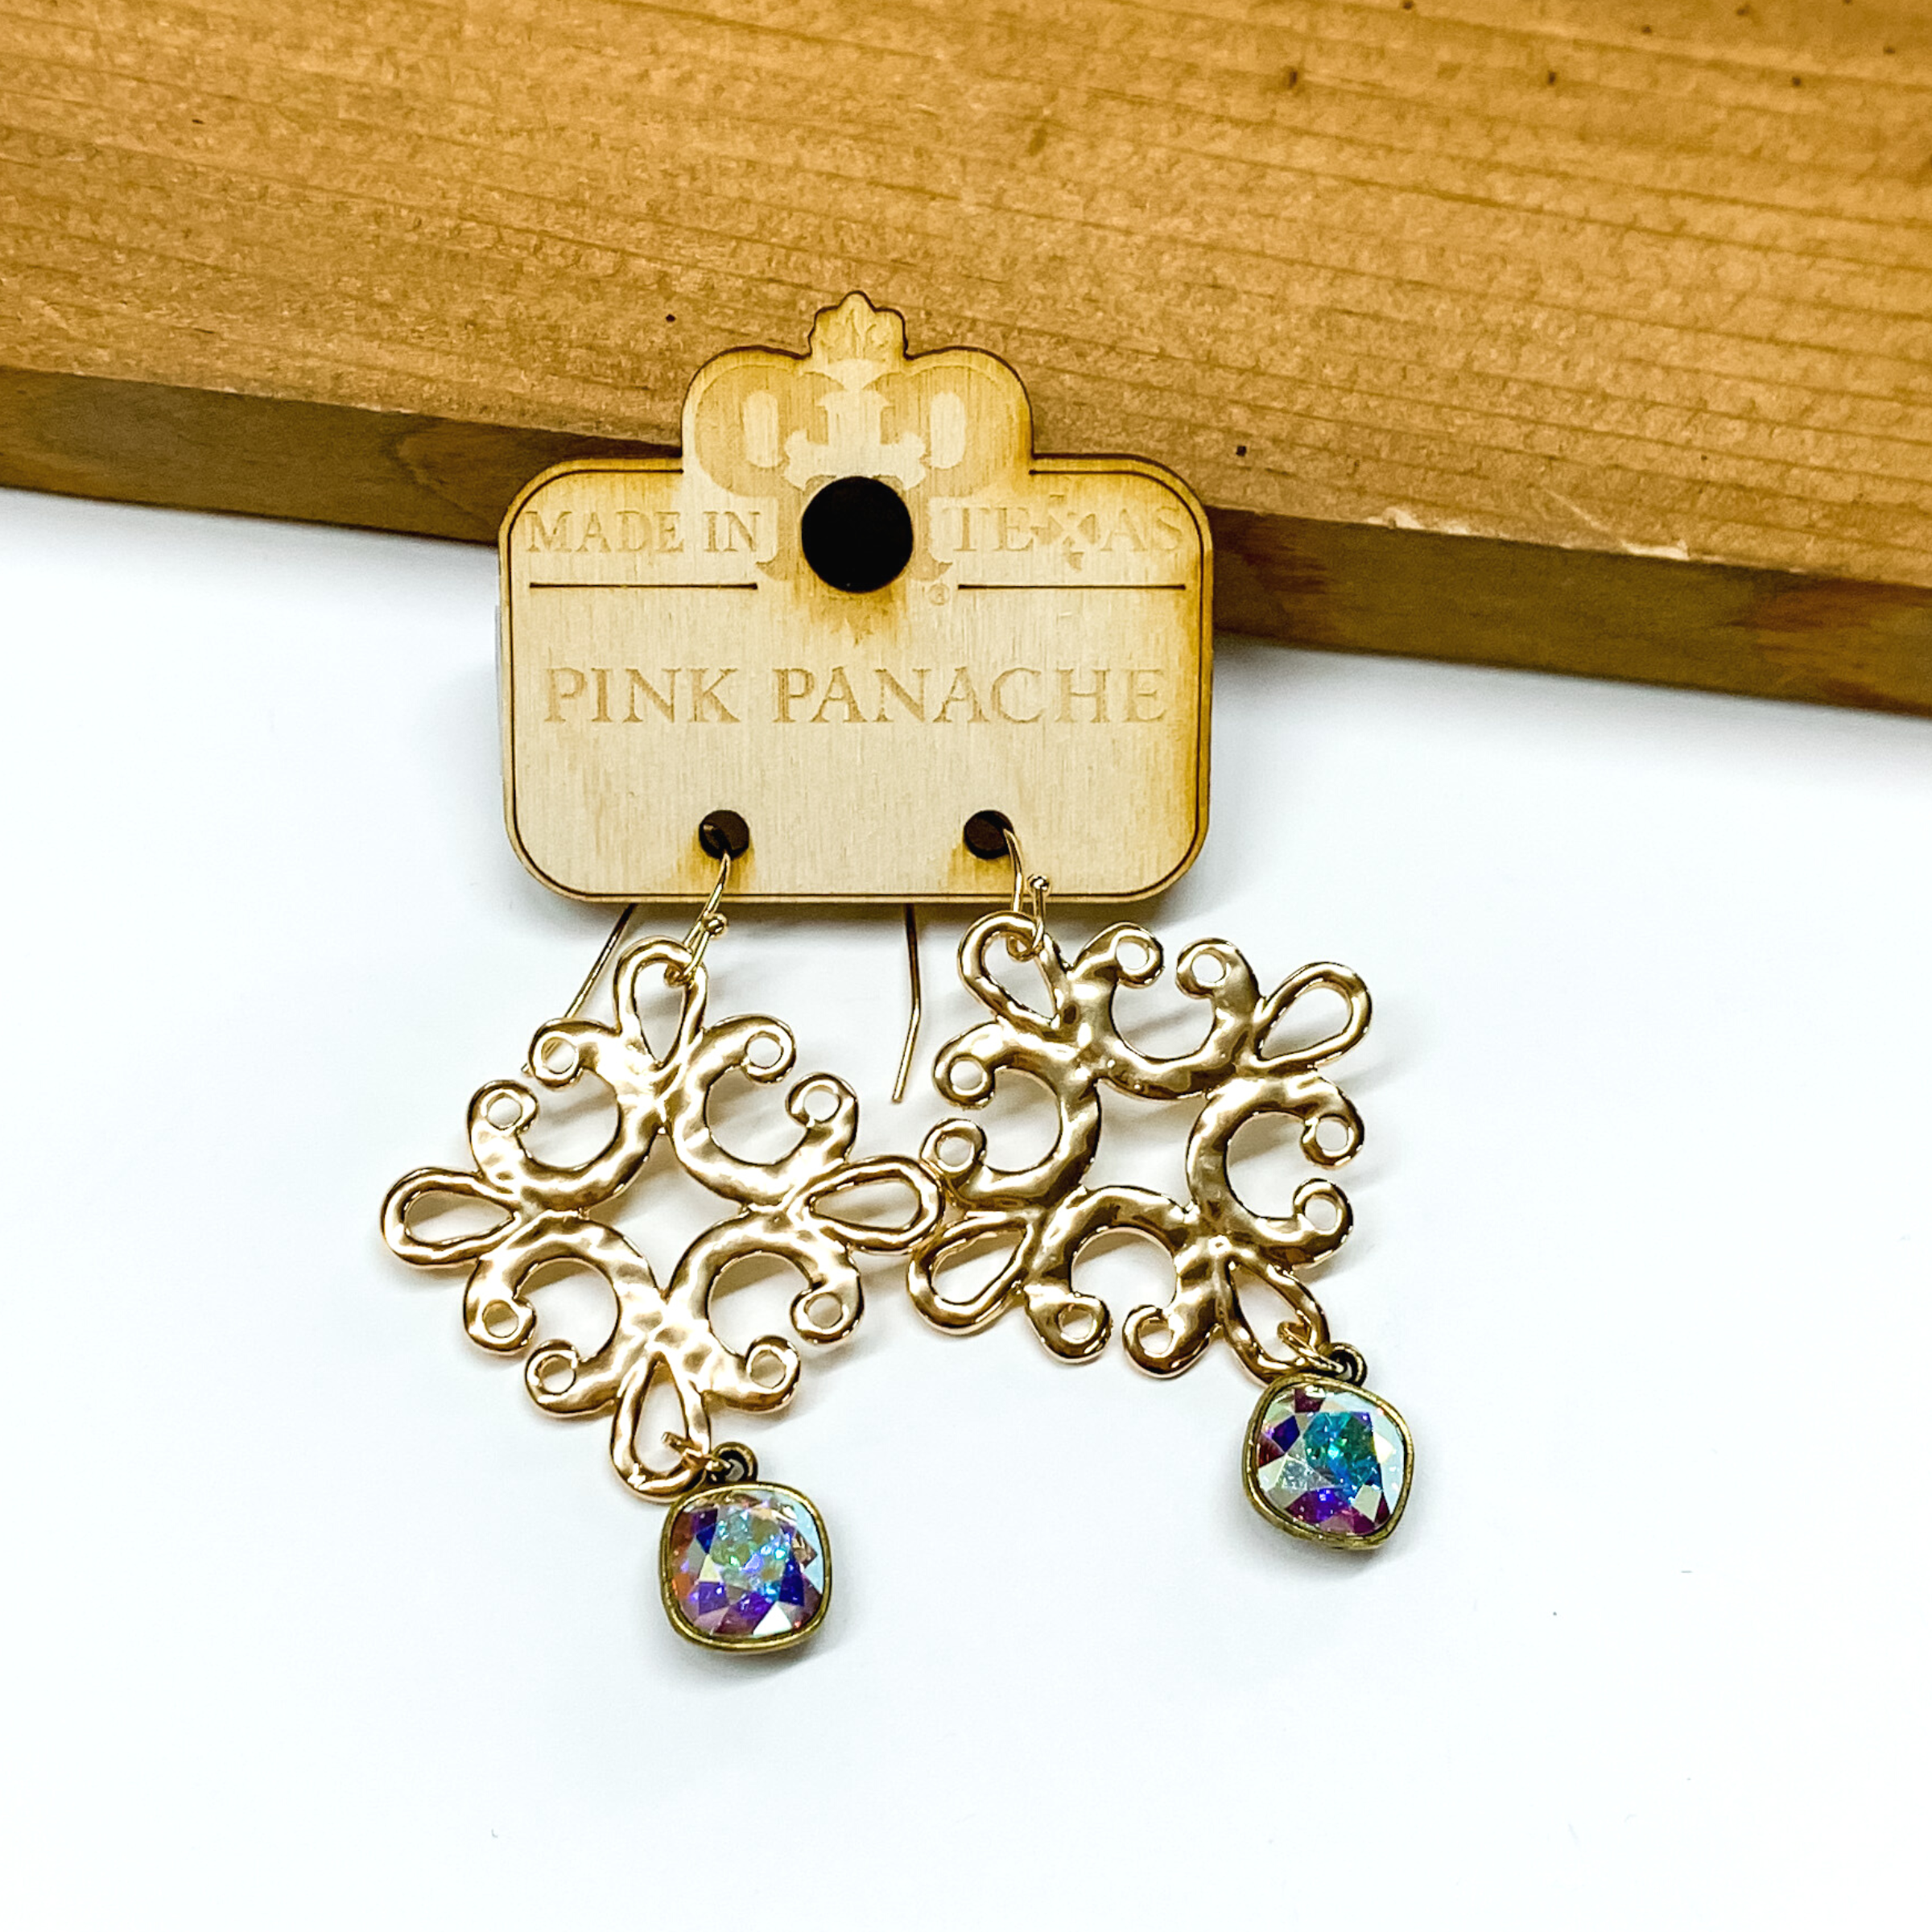 Hanging gold quatrefoil earrings with a hanging ab cushion crystal. these earrings are pictured in front of a brown block on a white background. 